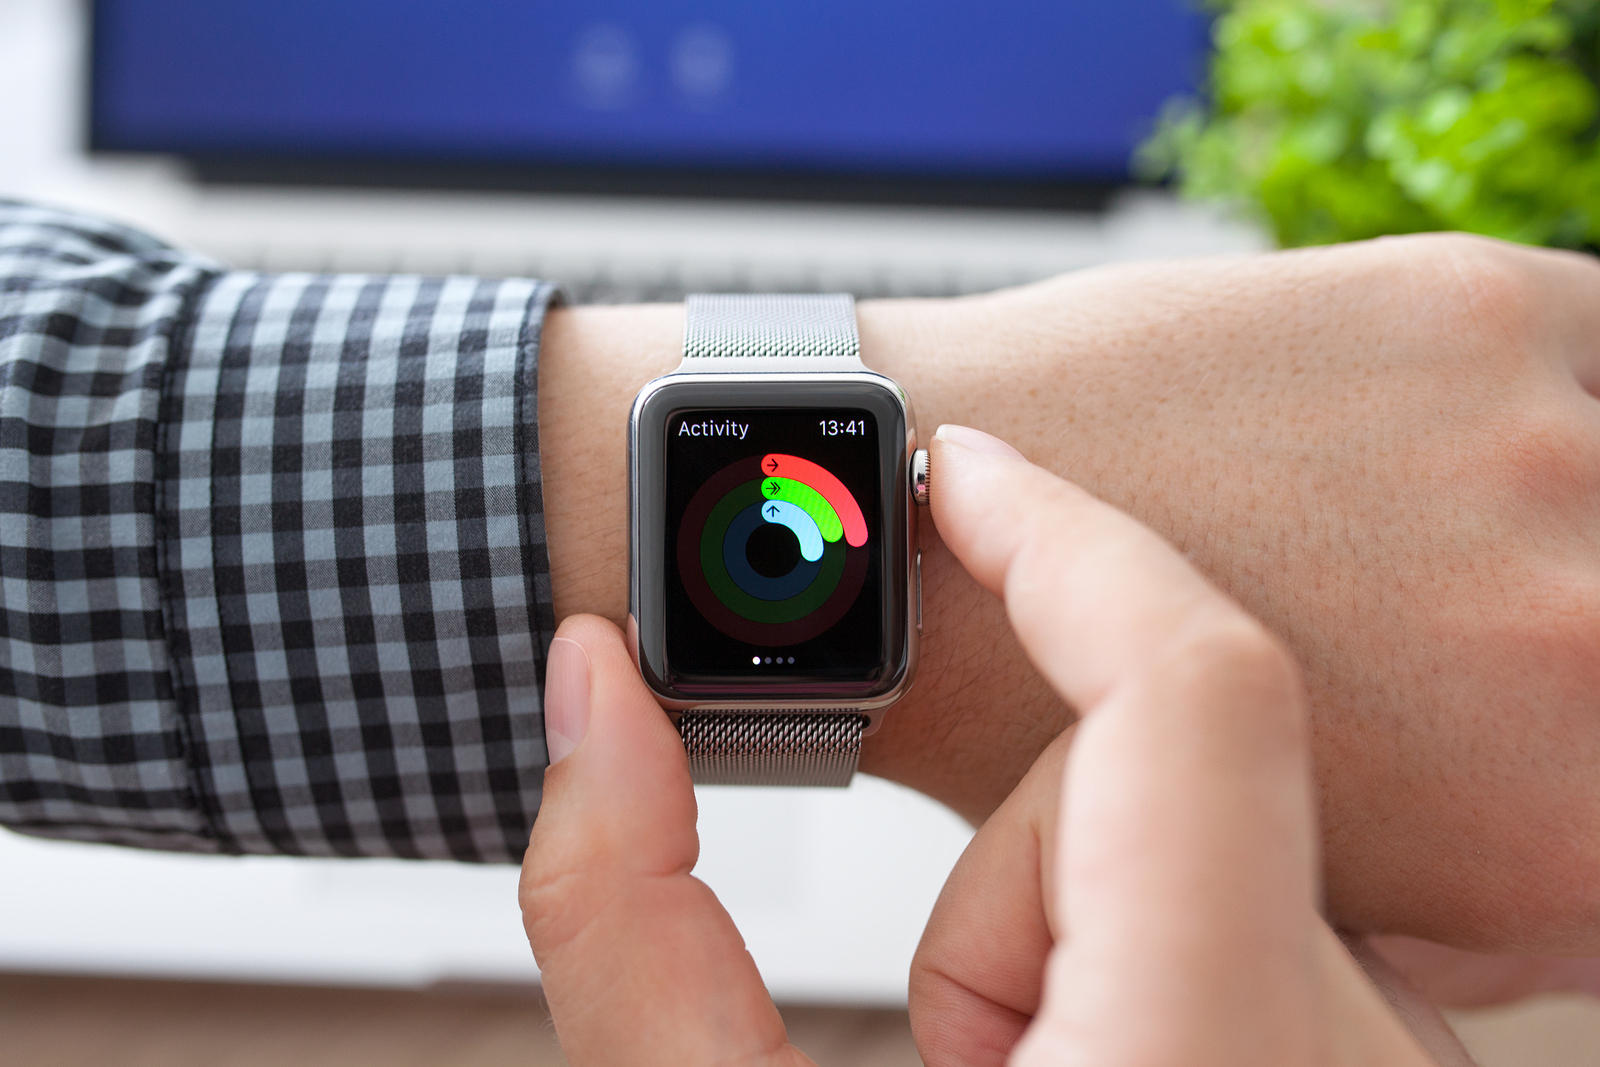 Apple Watch with app Activity on the screen